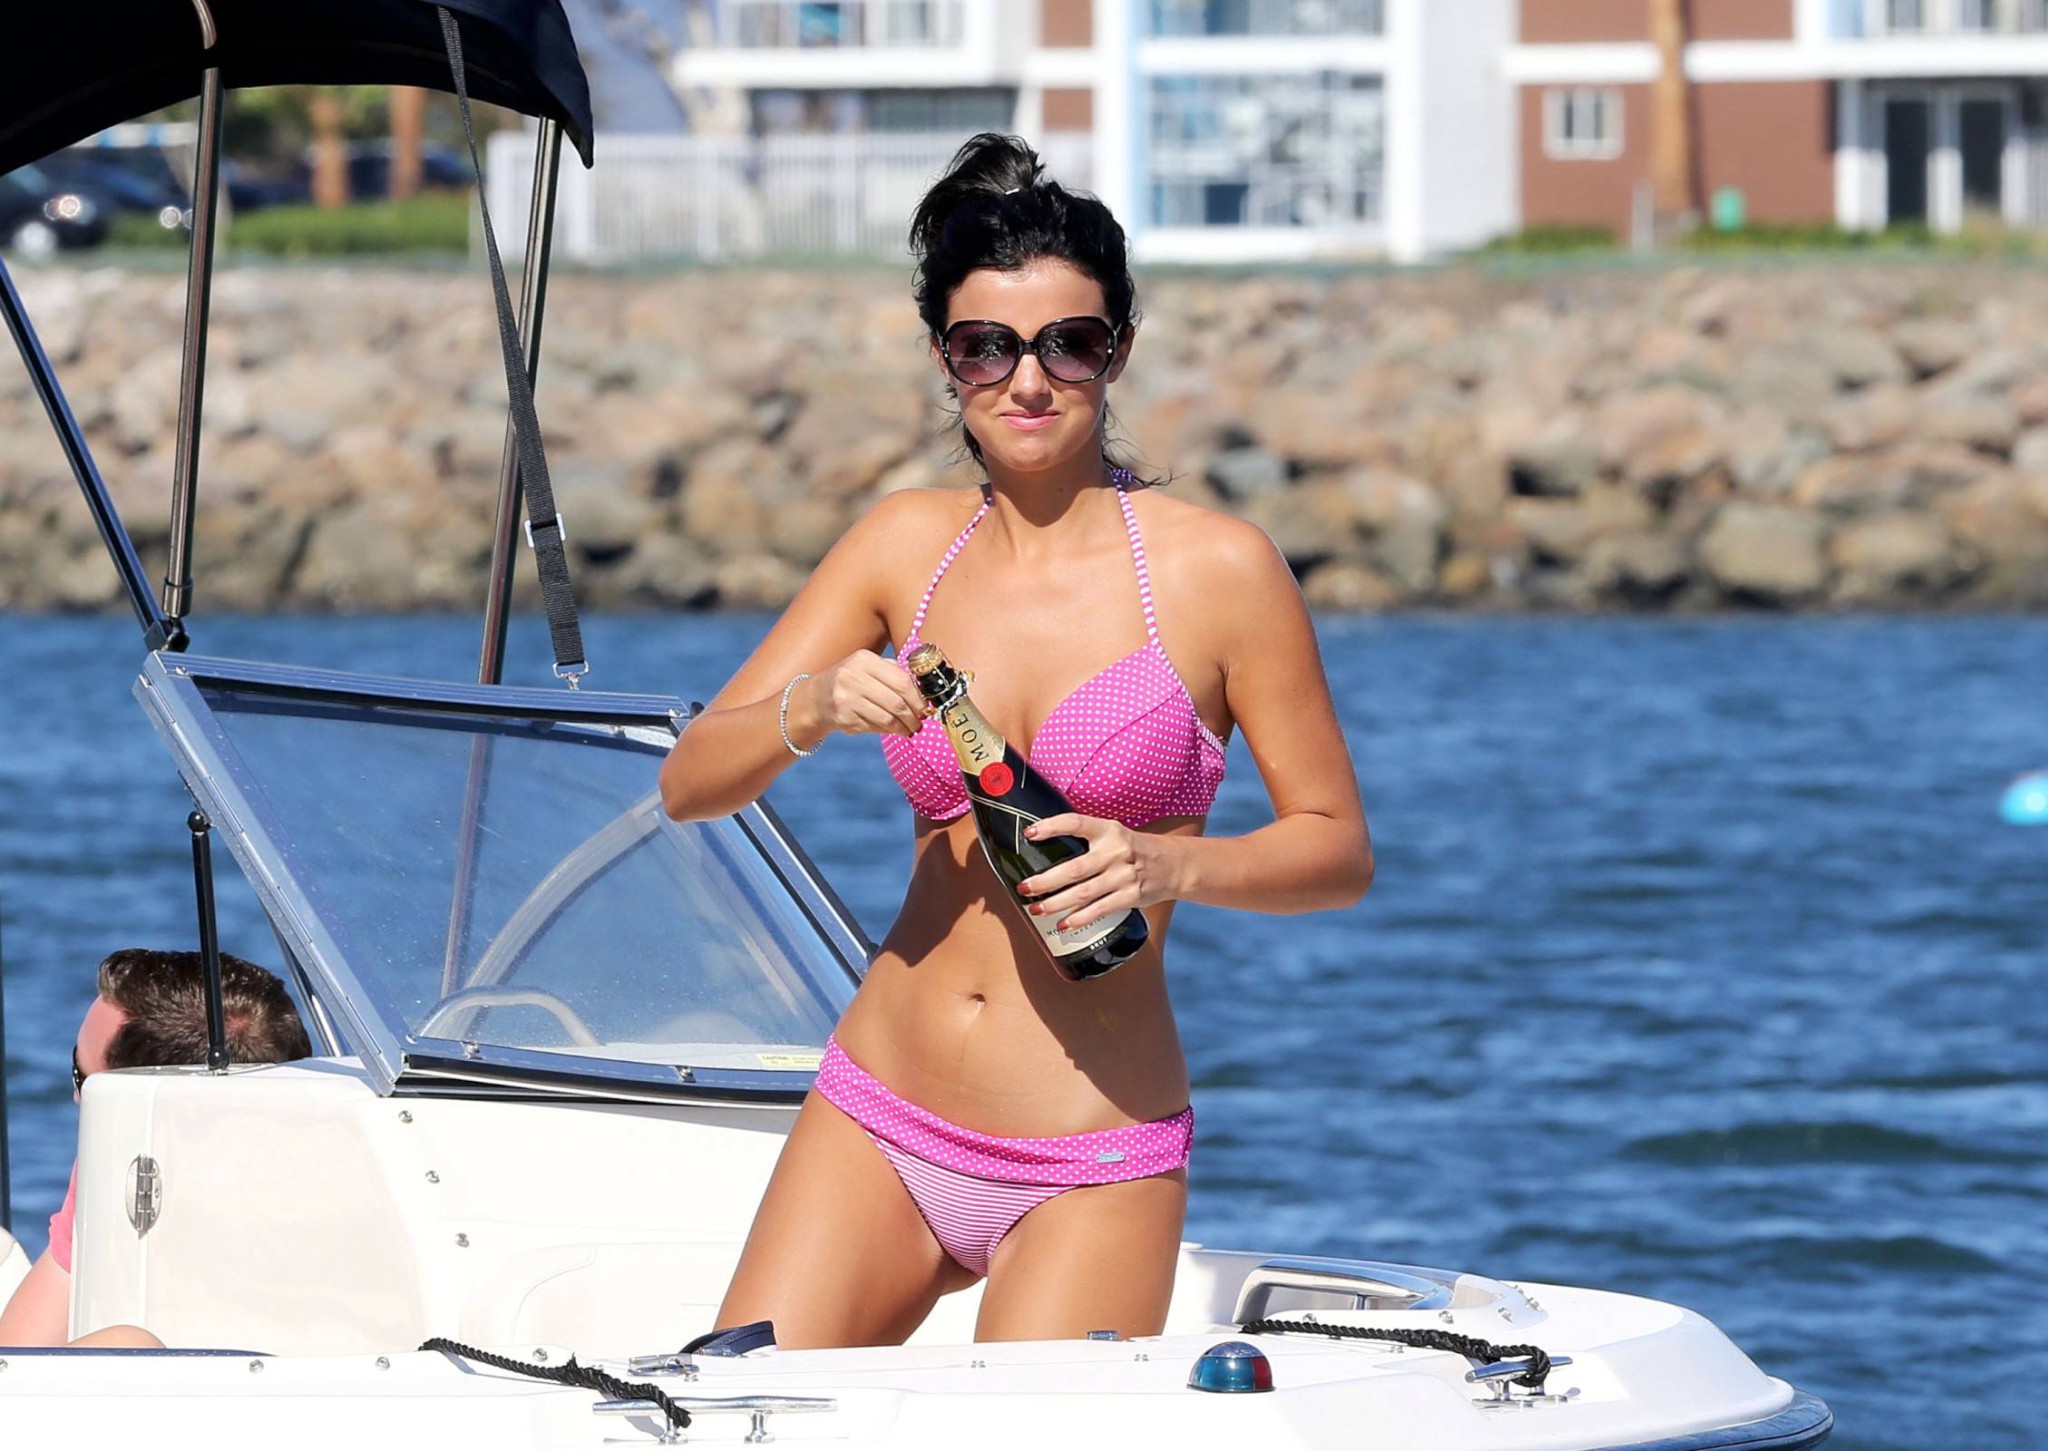 Lucy Mecklenburgh wearing pink polka dot bikini fights with a bottle of Moet at  #75220299